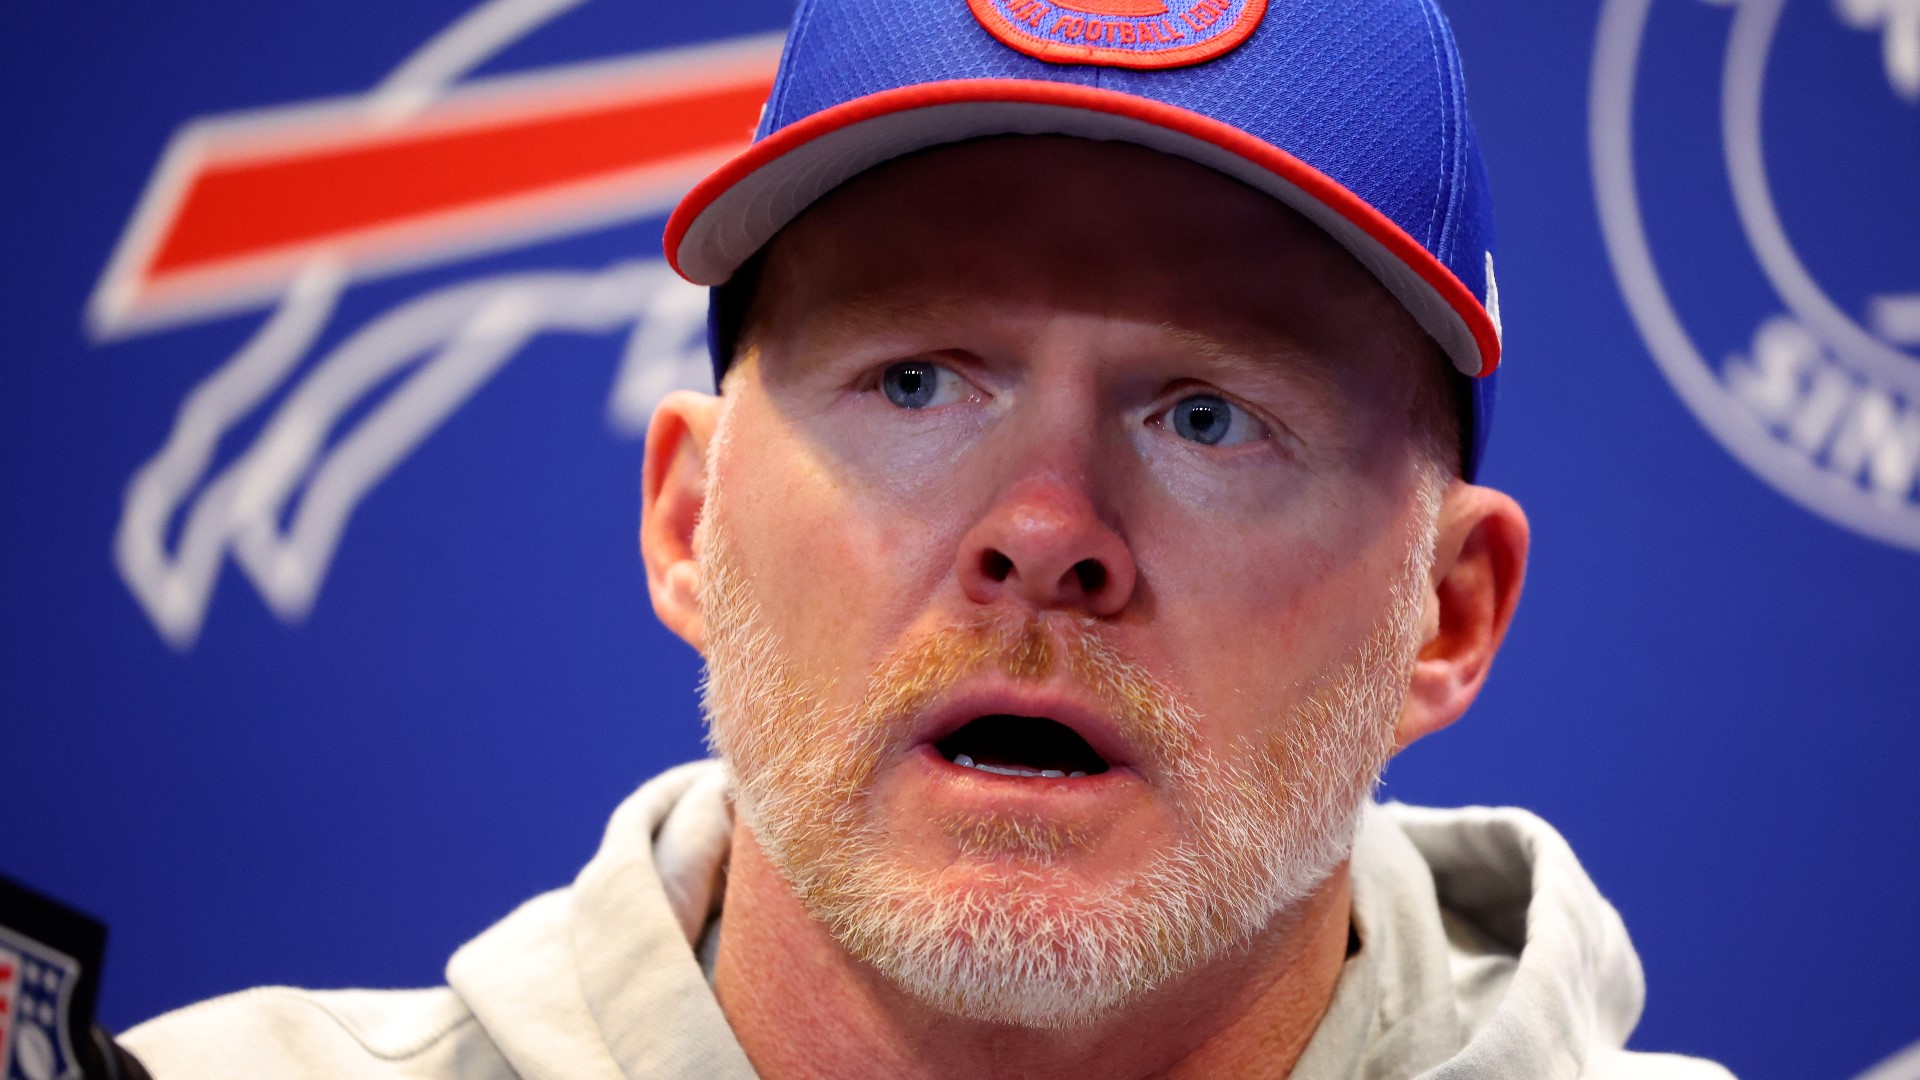 Bills postgame news conference: Sean McDermott. The Bills offense came to life at the start of the second half, as the Bills cruised to a 32-6 win.